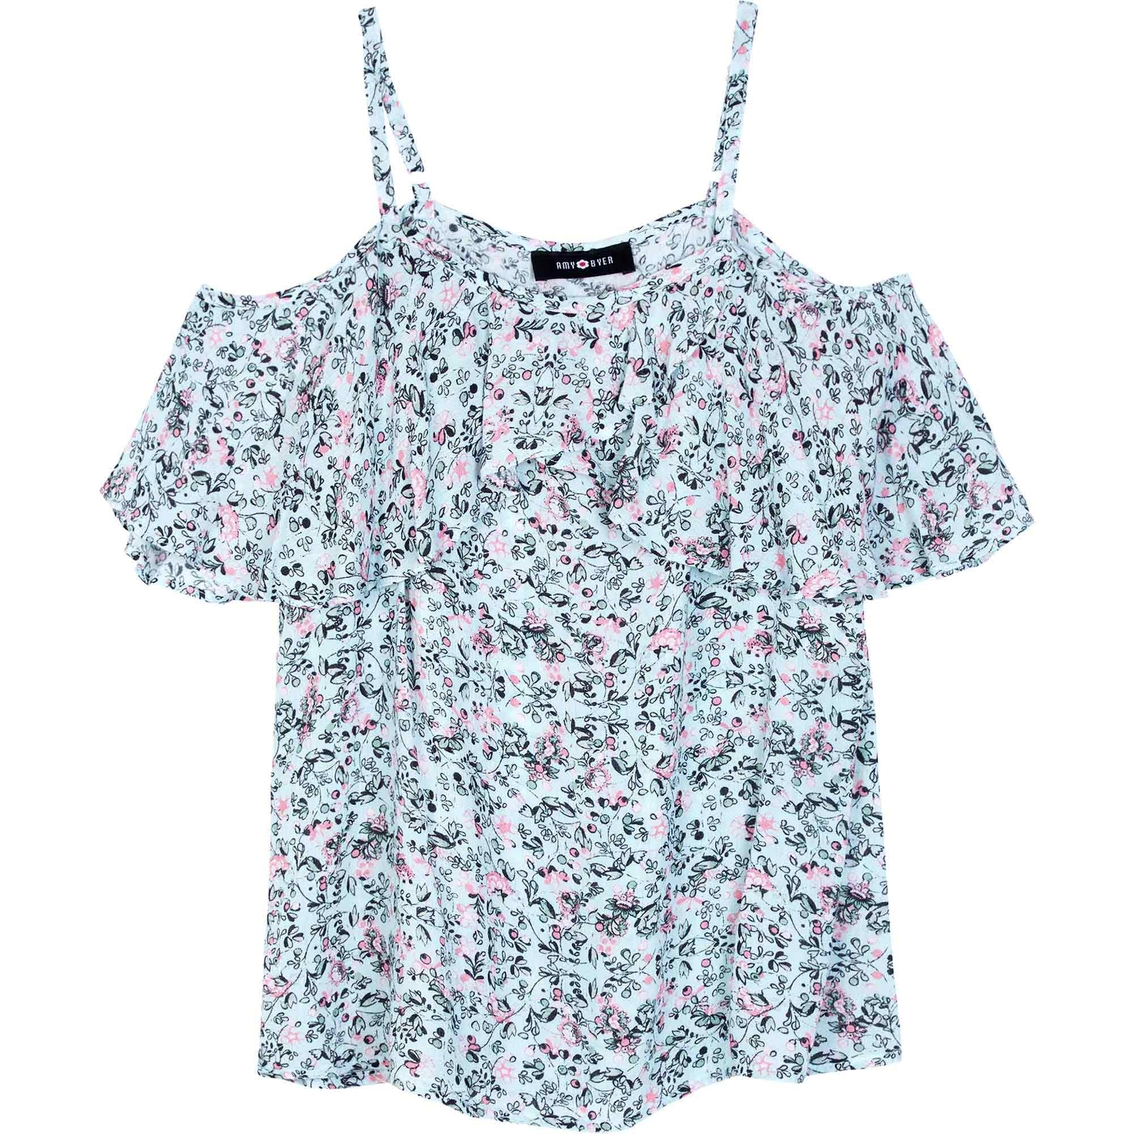 Amy Byer Girls Ditsy Floral Top | Girls 7-16 | Clothing & Accessories ...